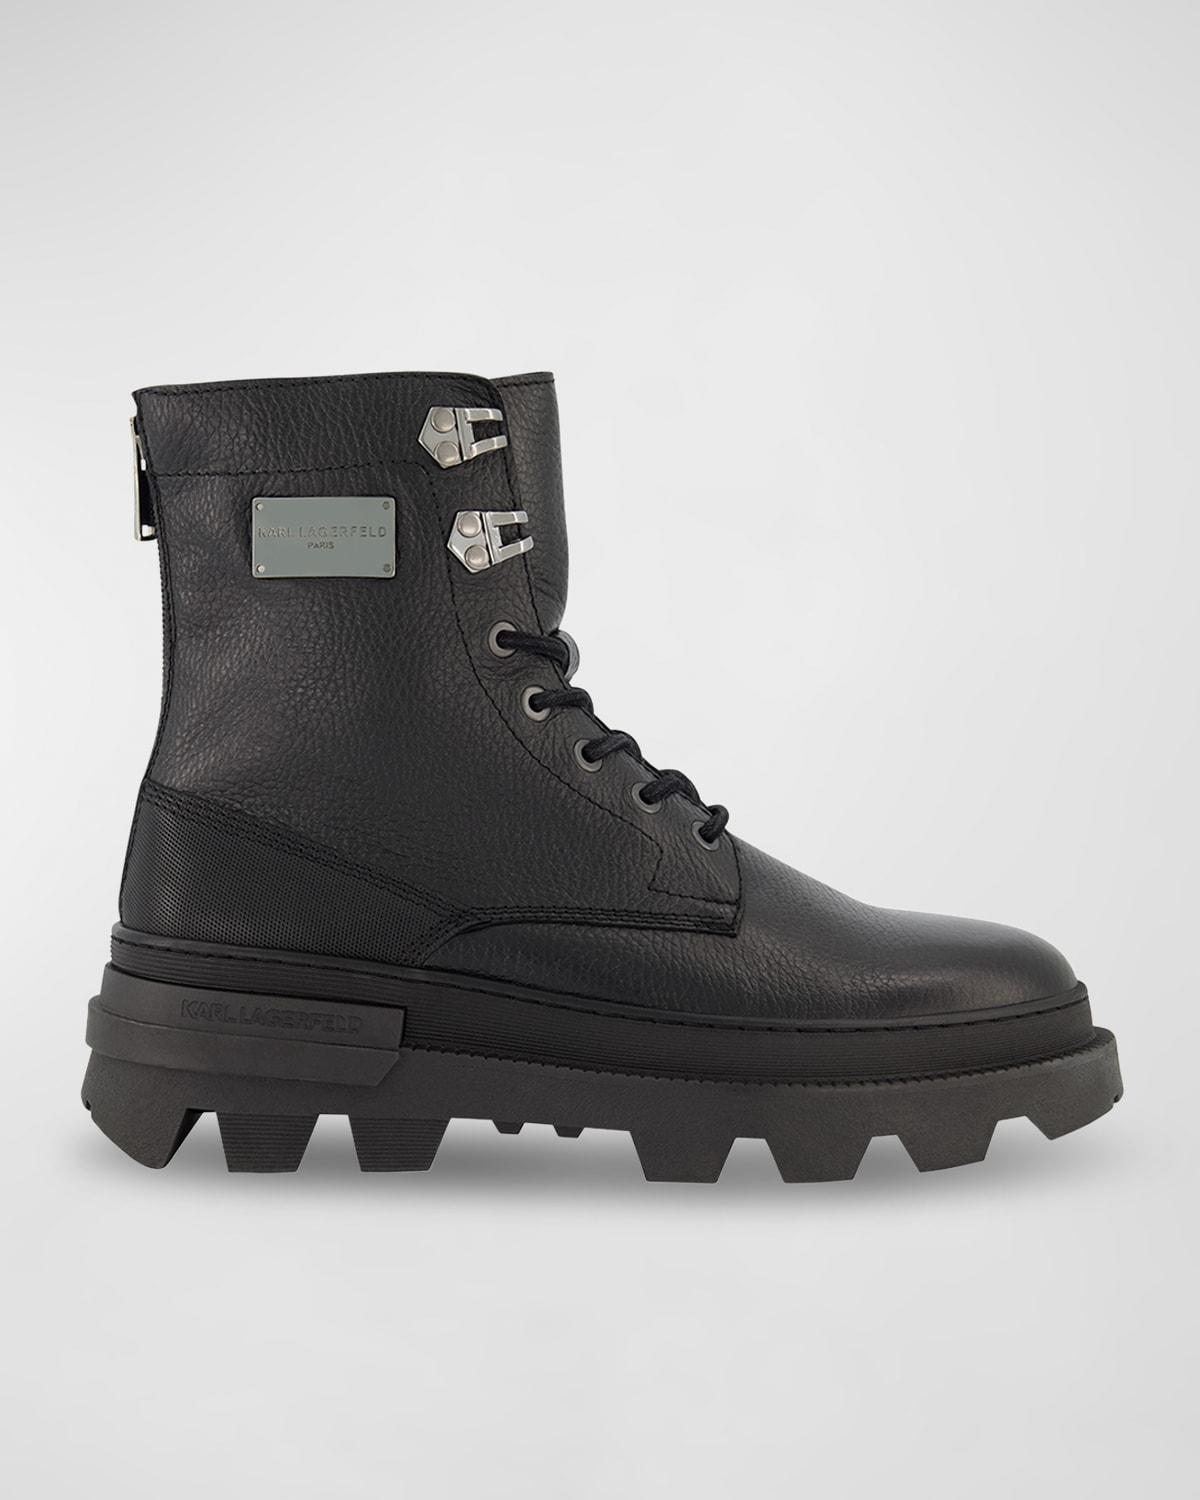 Karl Lagerfeld Paris White Label Lug Sole Work Boot Product Image